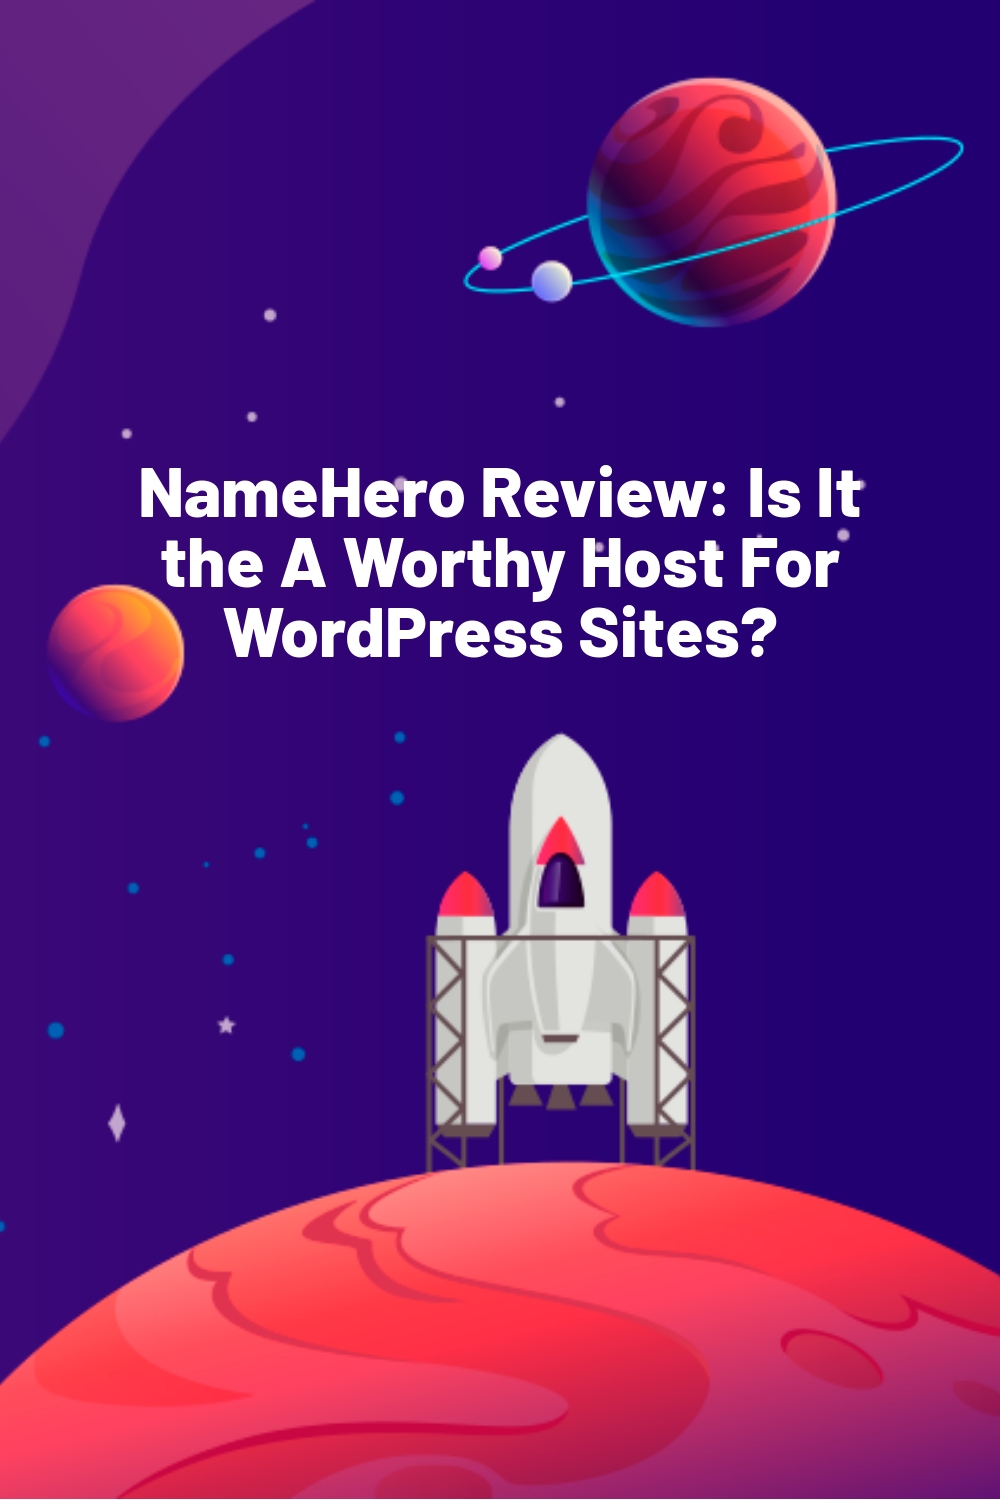 NameHero Review: Is It the A Worthy Host For WordPress Sites?